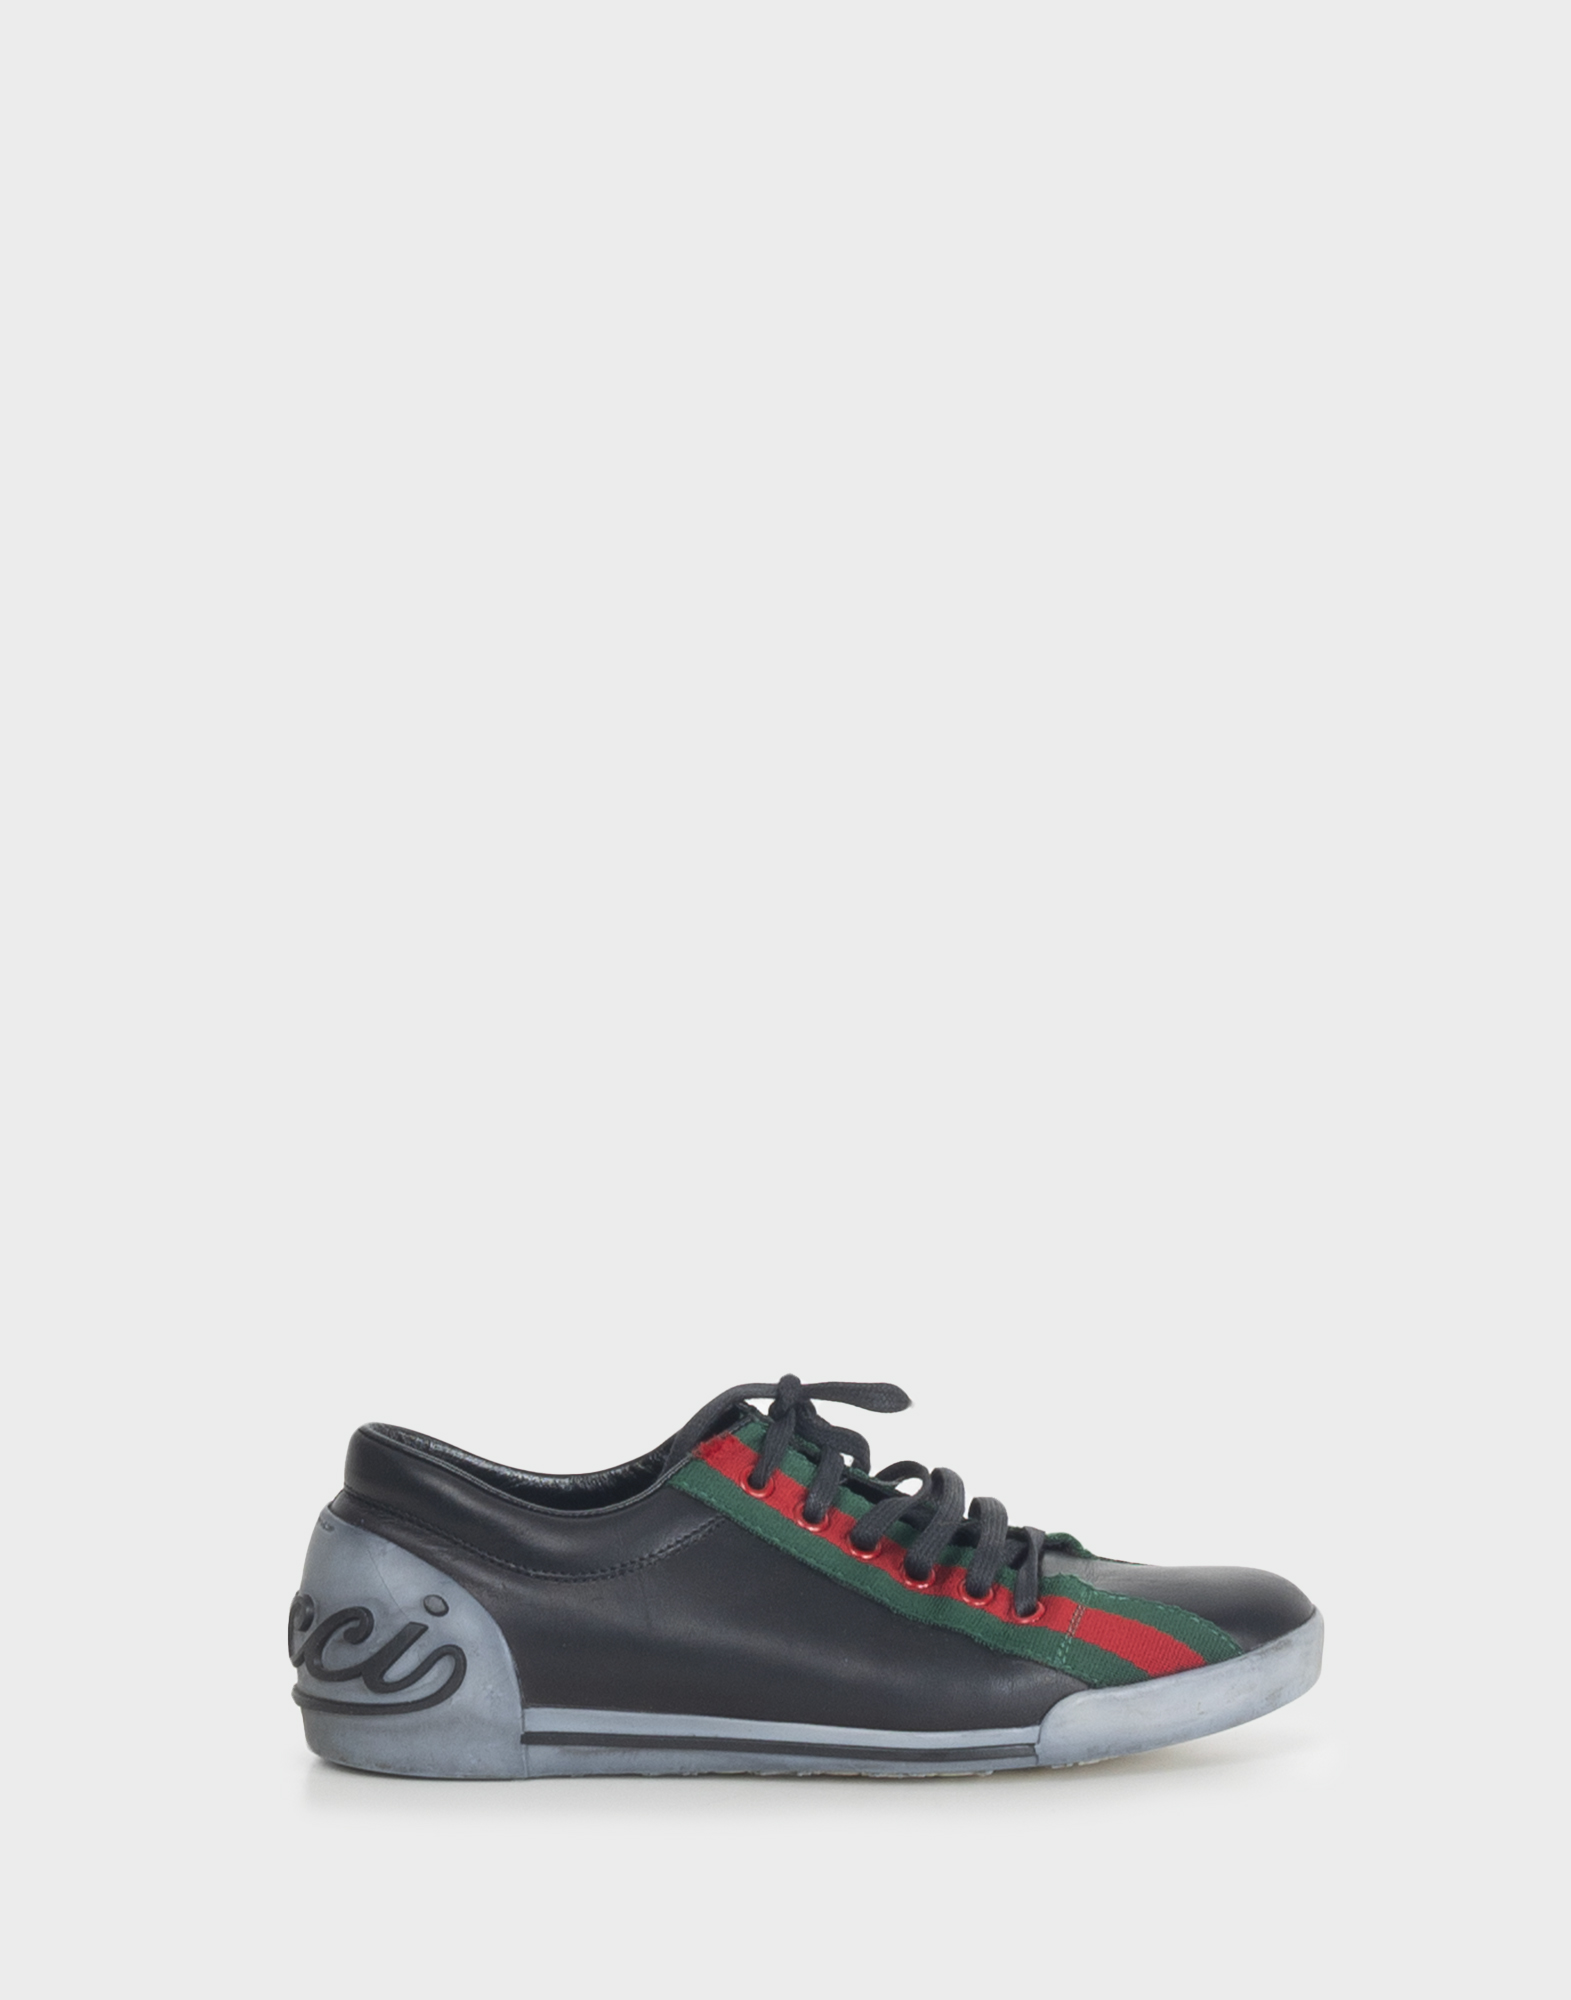 Women's low black leather shoes with rubber logoed heel and detail with green and red fabric stripe